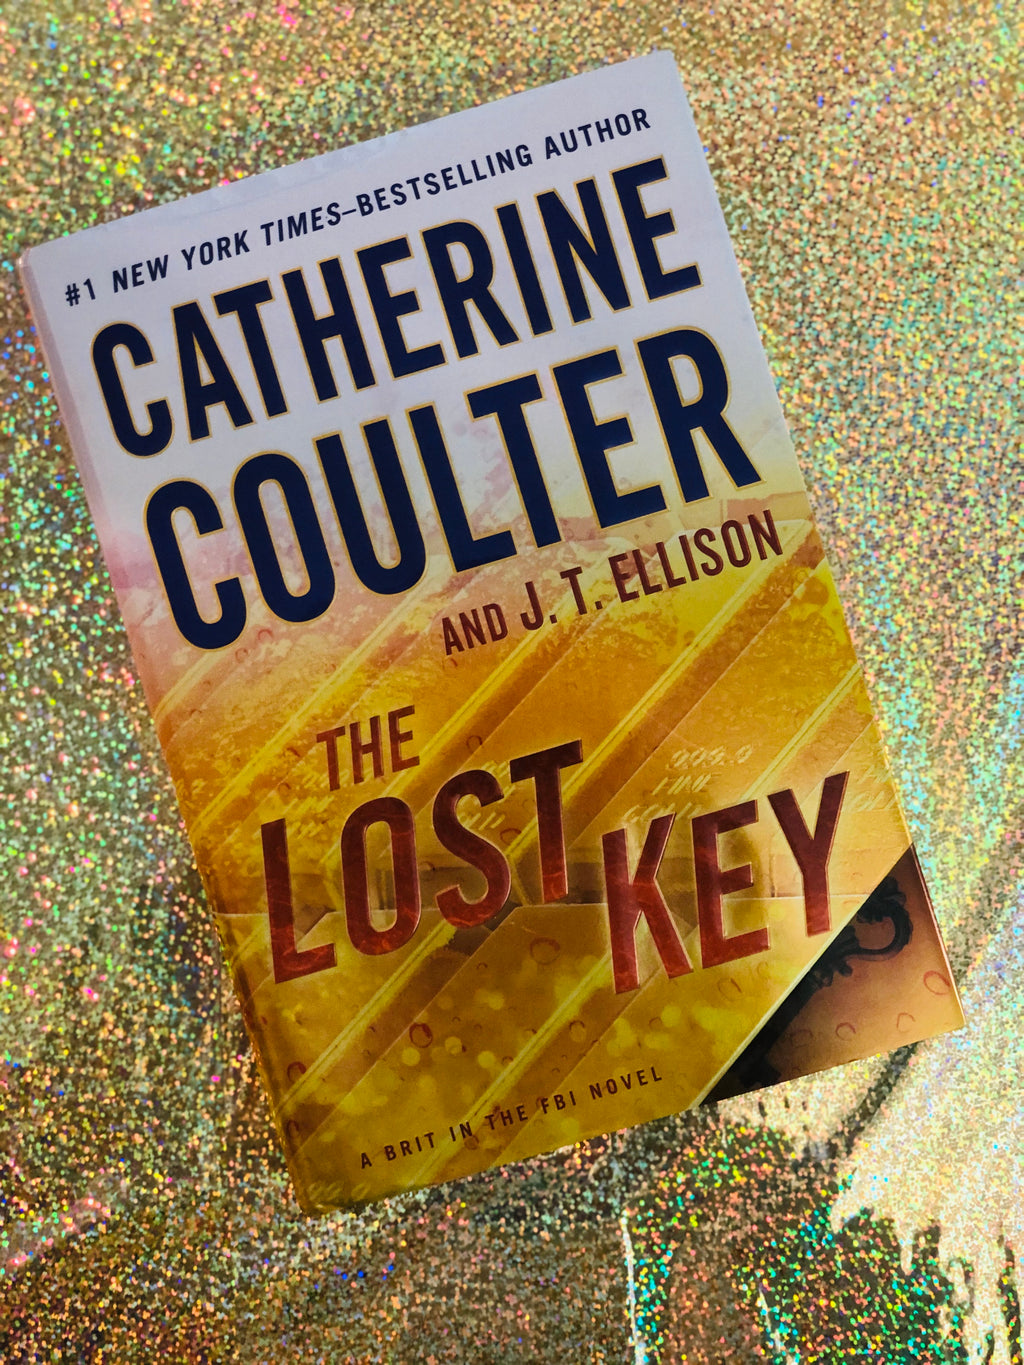 The Lost Key- By Catherine Coulter and J.T. Ellison